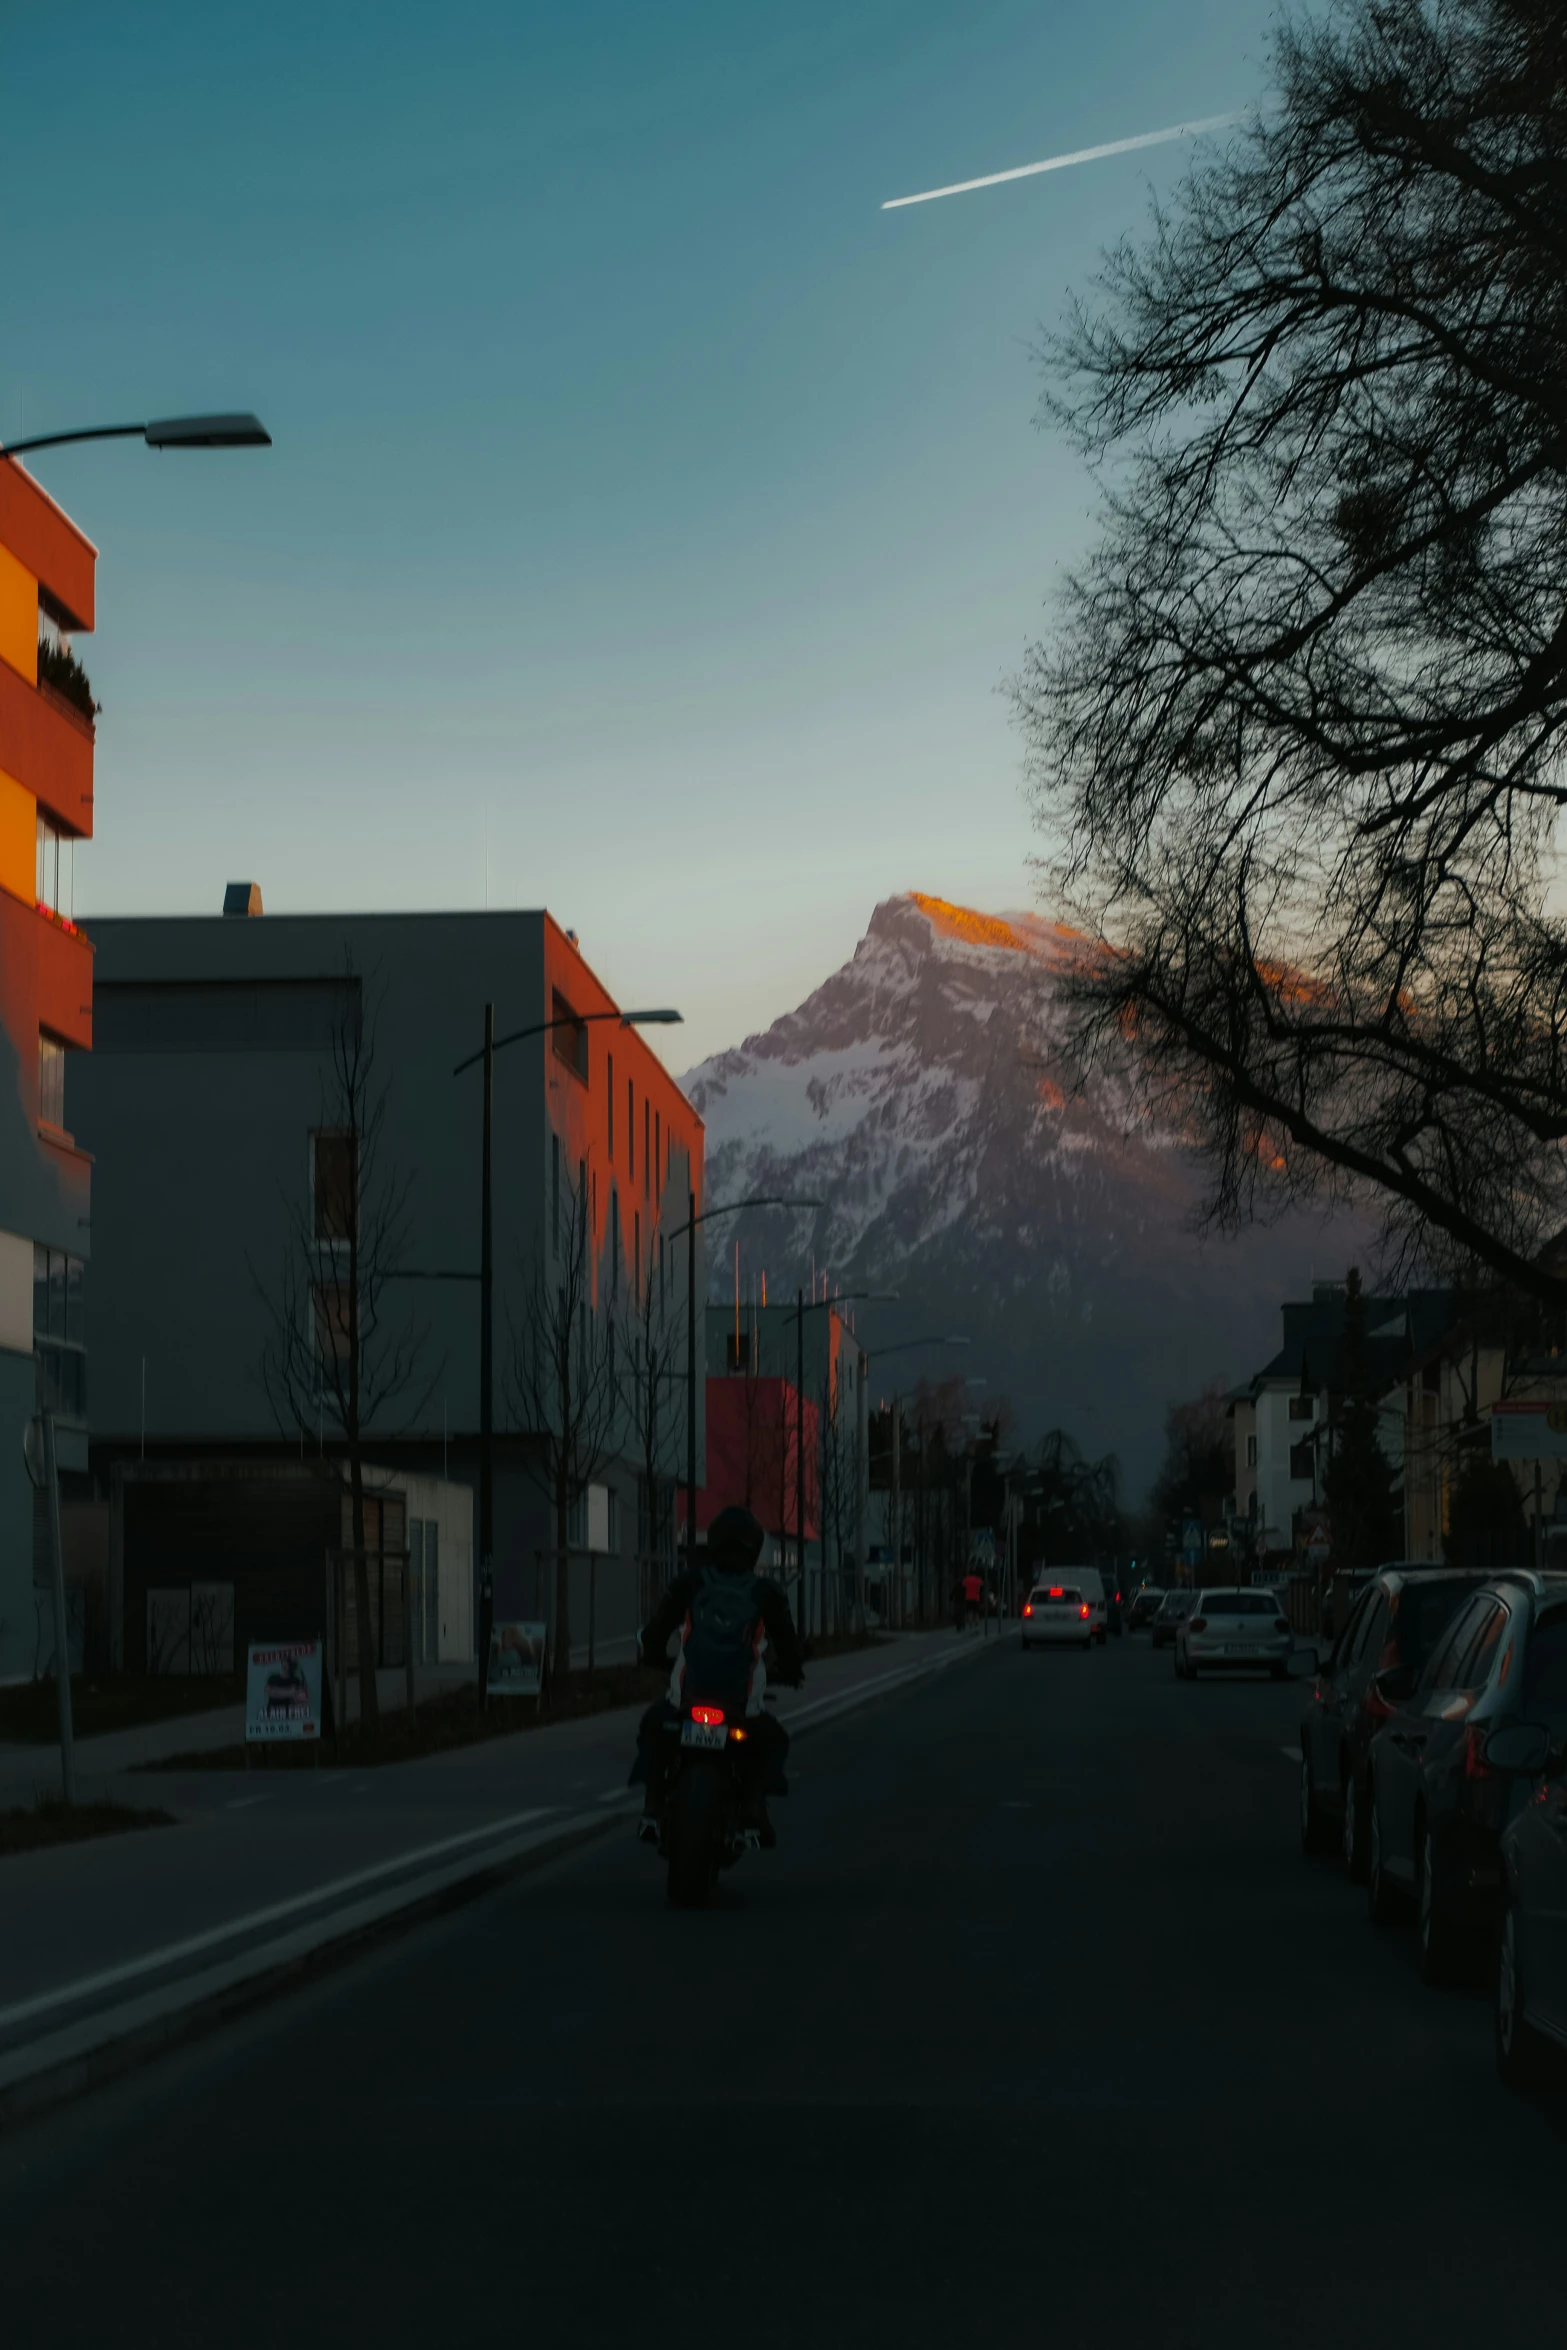 a person on a motorcycle near buildings with a mountain in the background